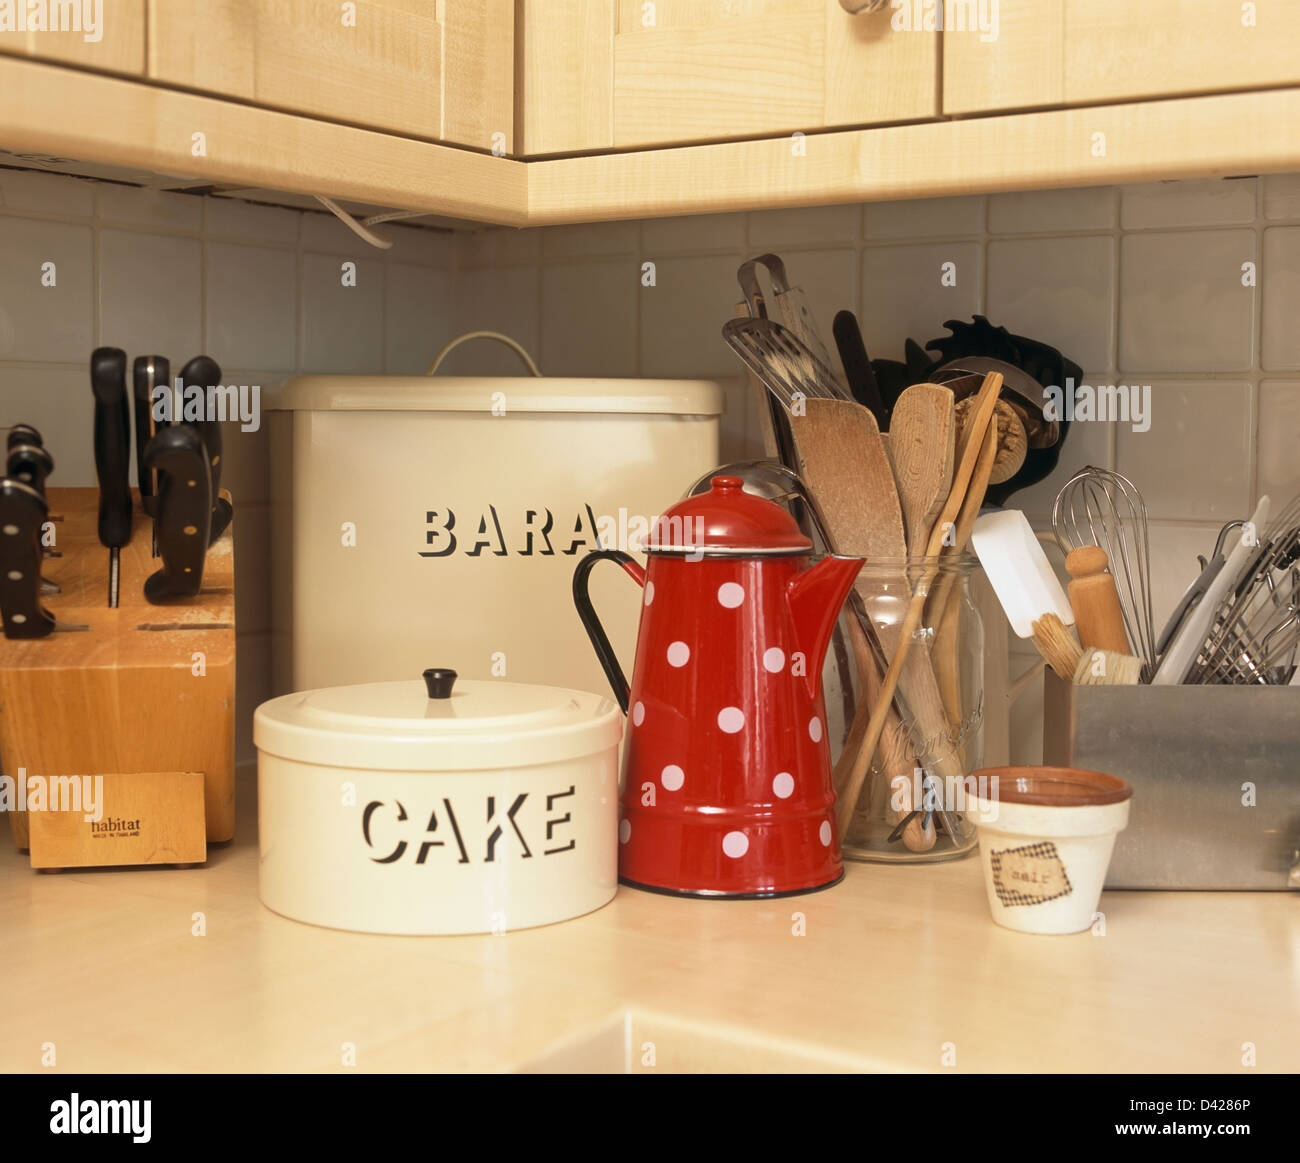 Cream enamel cake and bread bins with 